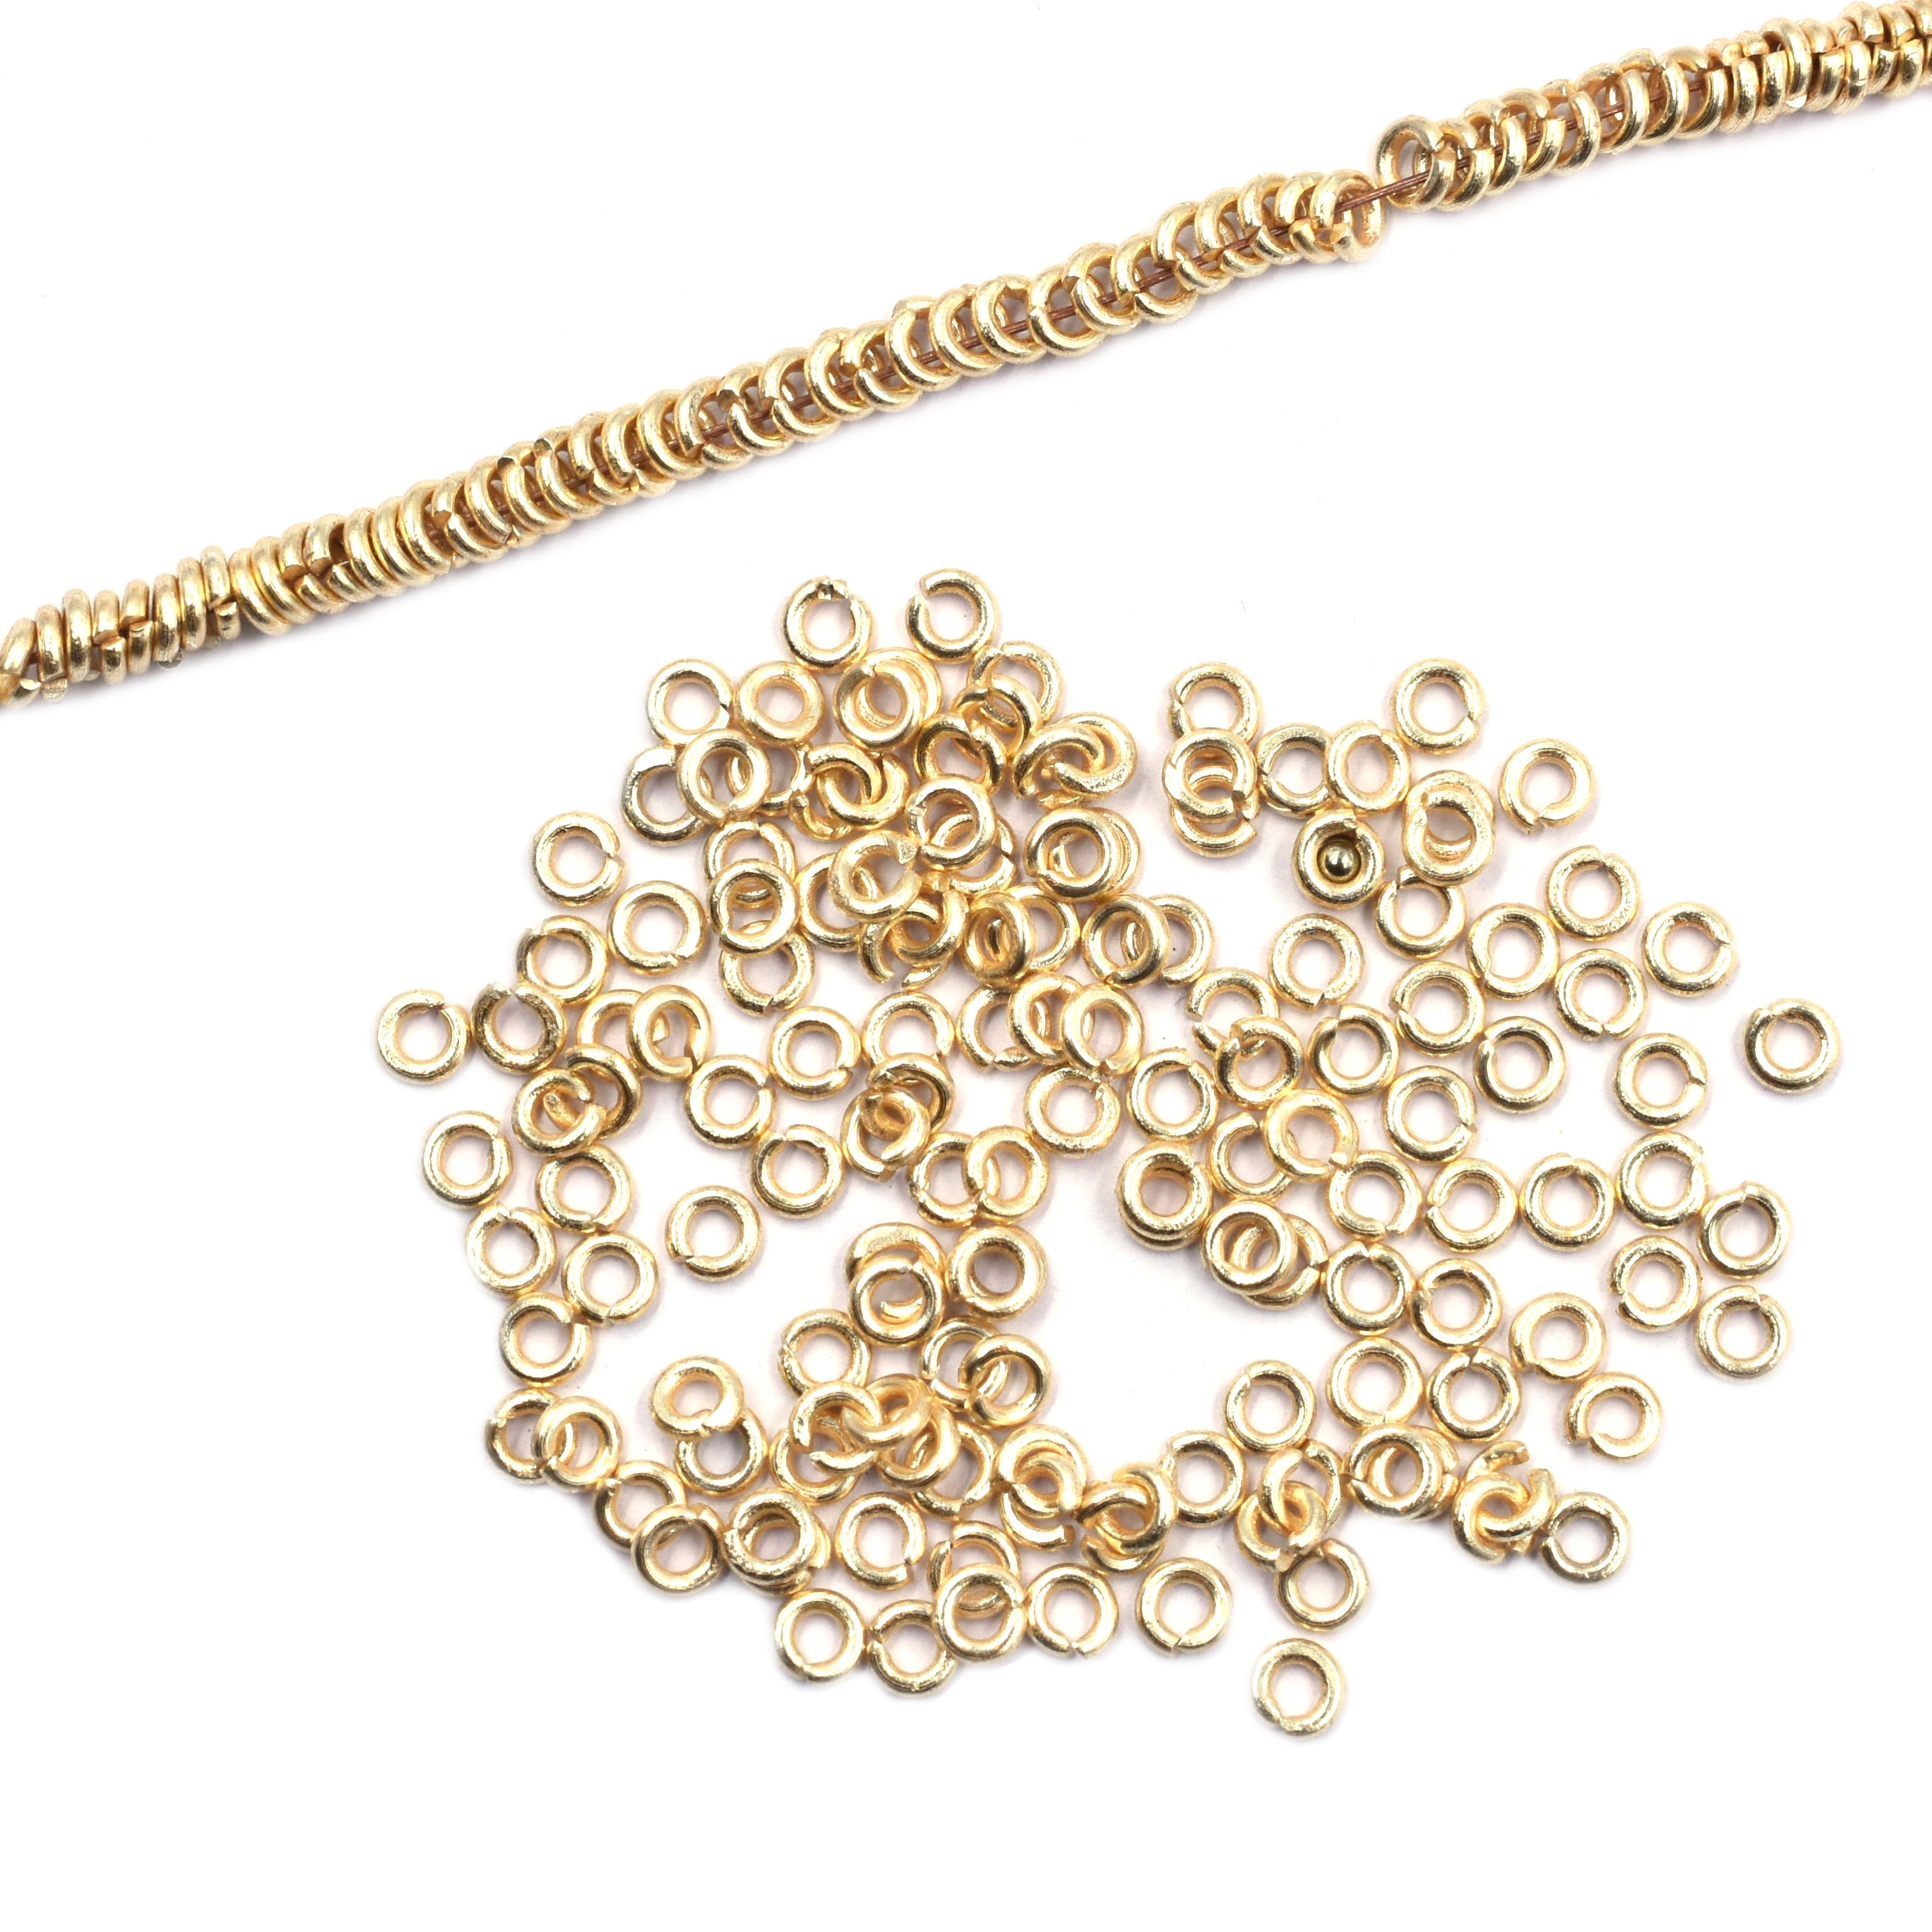 500 Pcs 4mm Open Jump Ring Gold Plated Copper